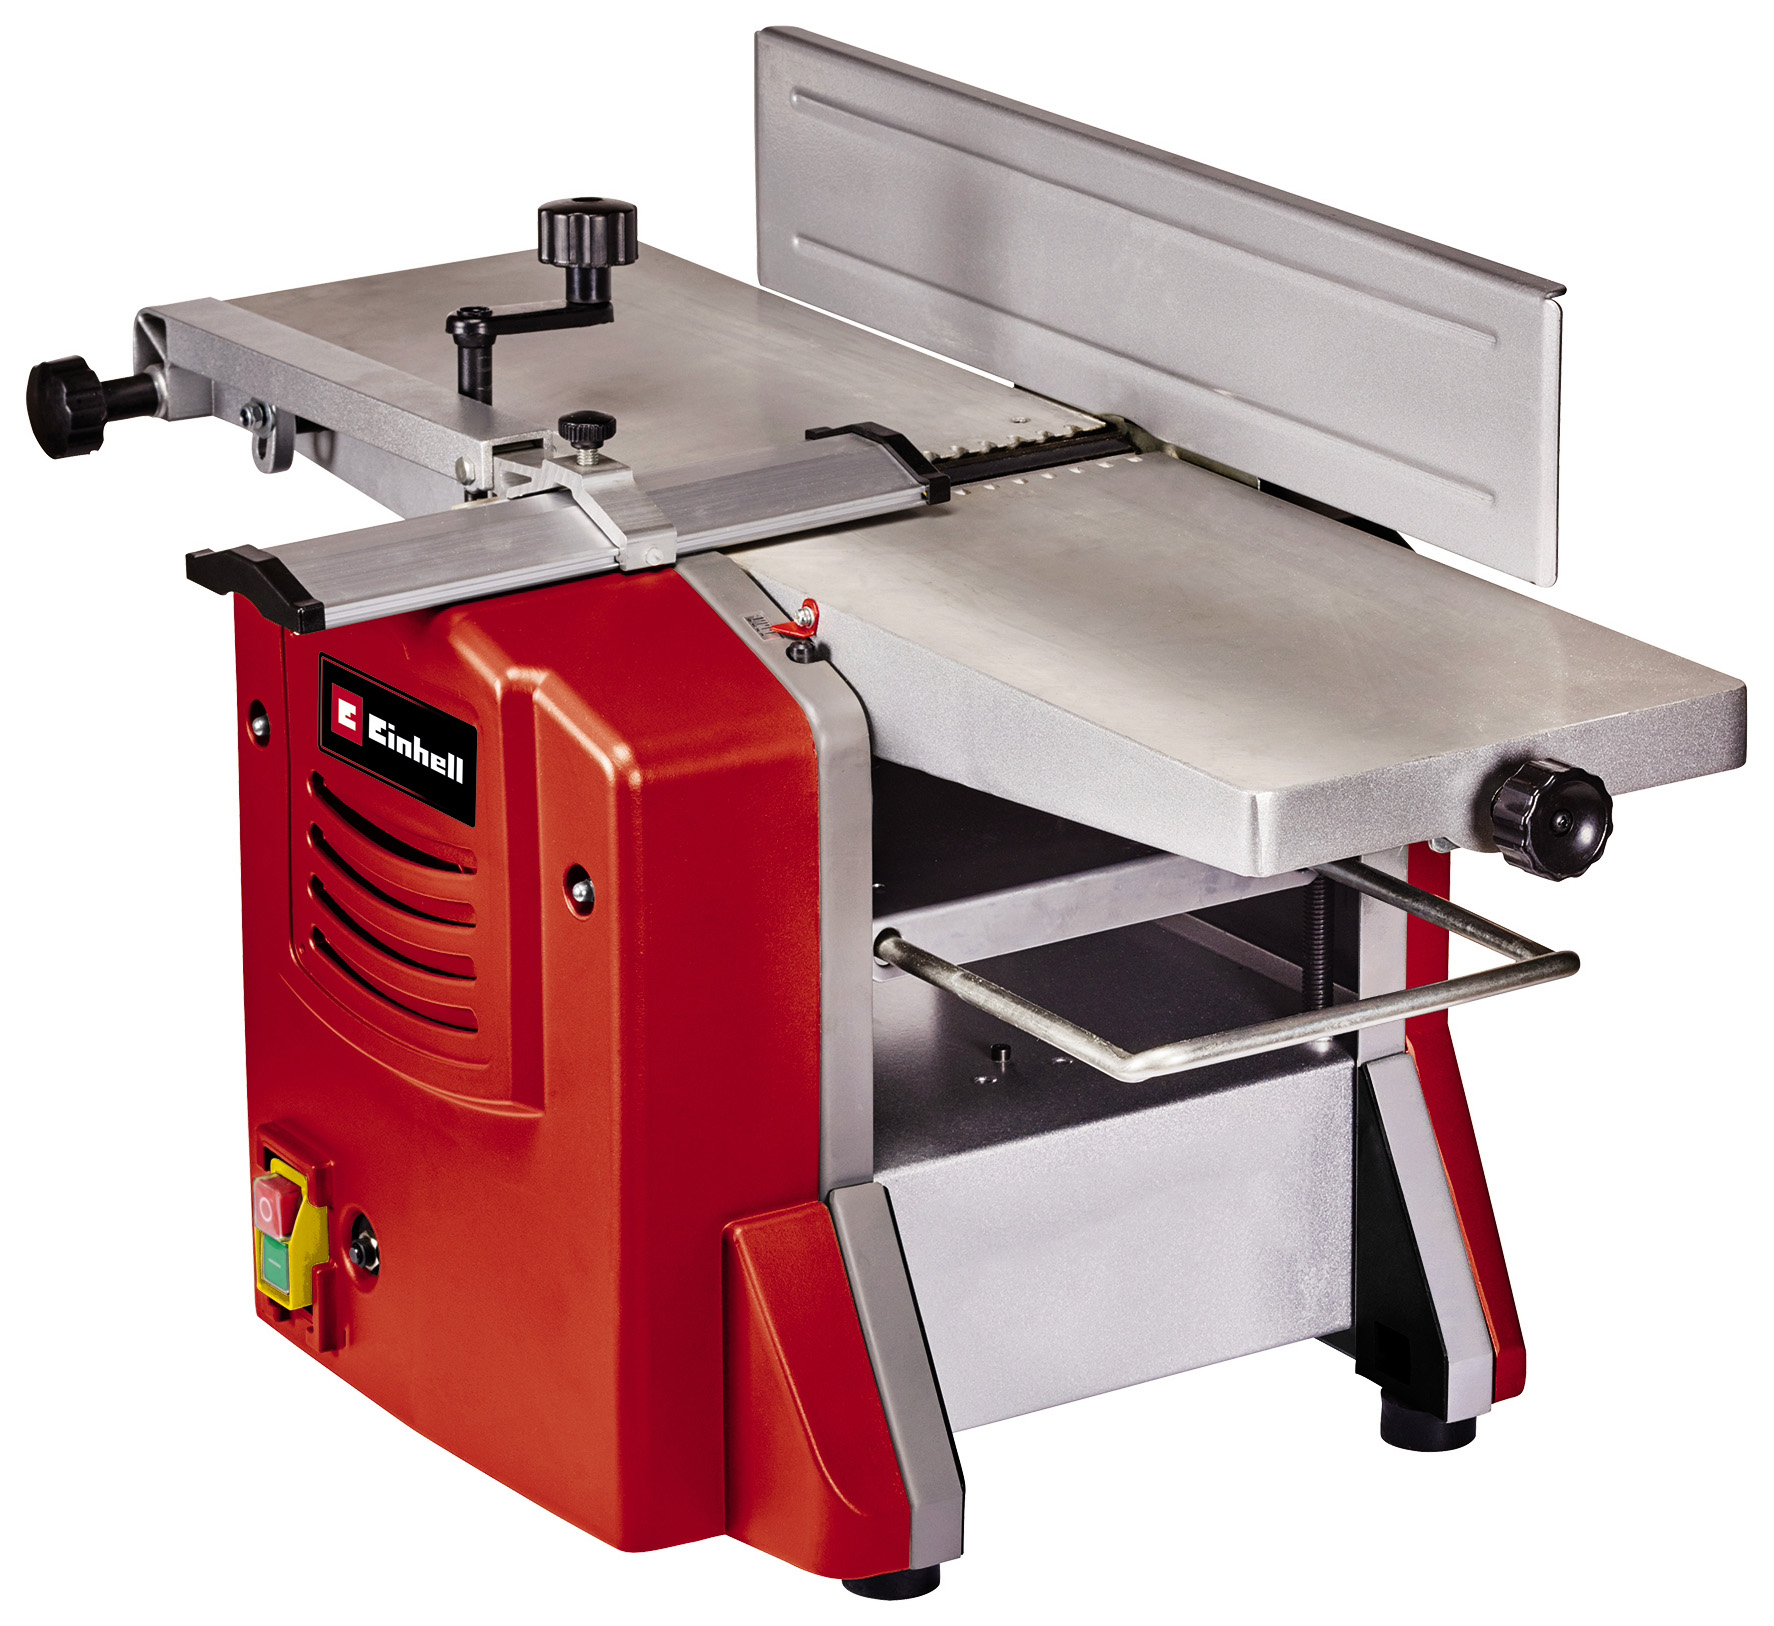 Image of Einhell TC-SP 204 204mm Corded Planer Thicknesser - 1500W